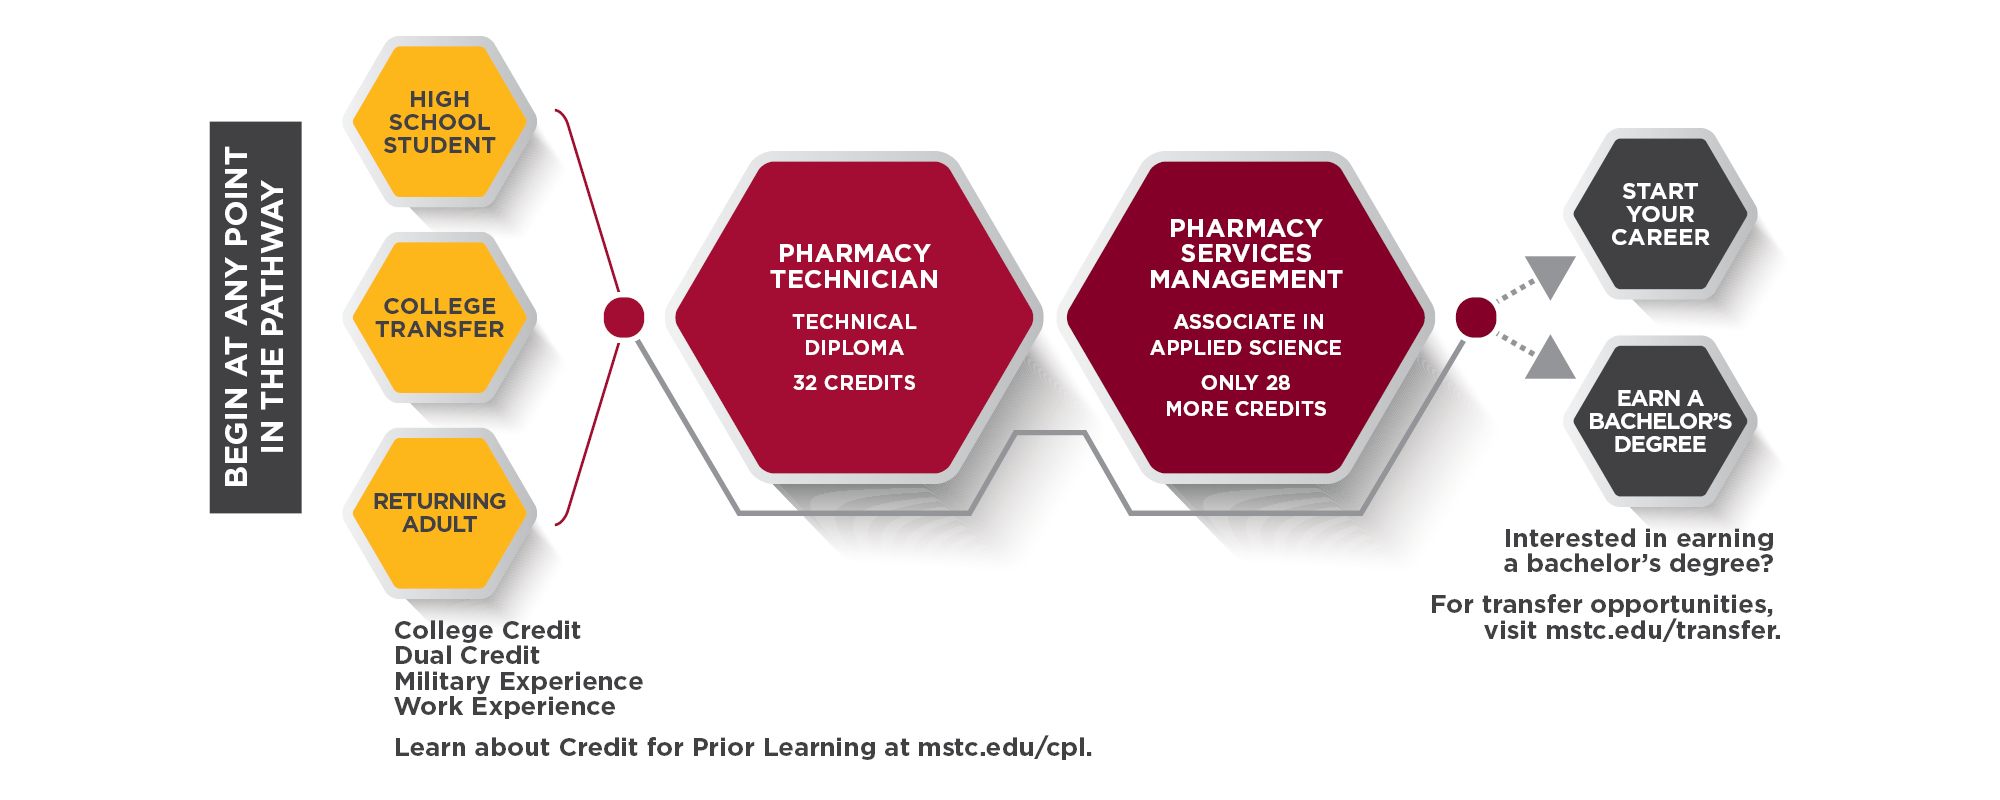 Pharmacy Services Management Pathway